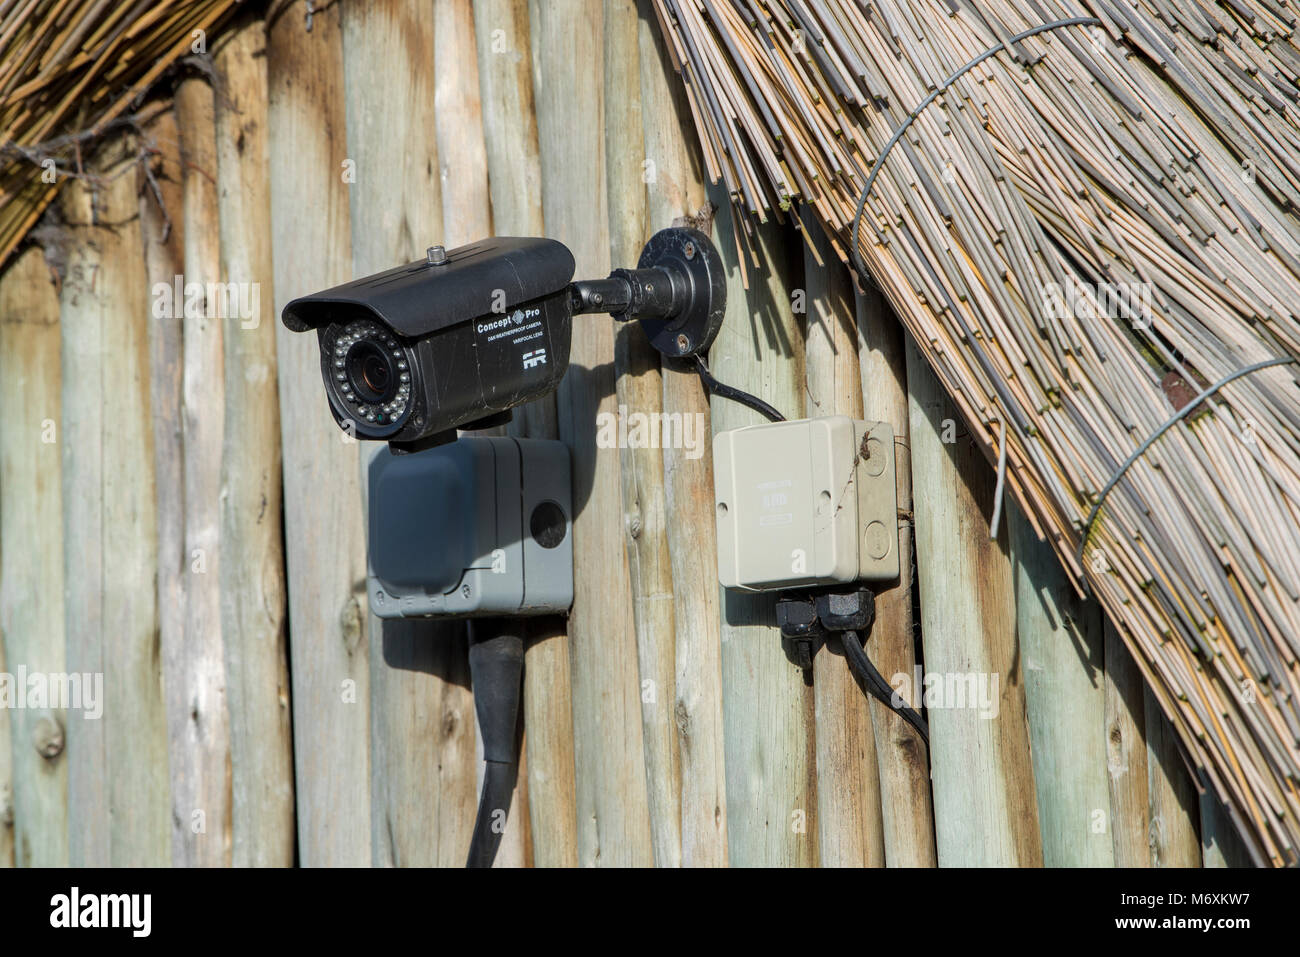 Security camera on a wooden building, Chester Zoo, Chester, Cheshire. Stock Photo